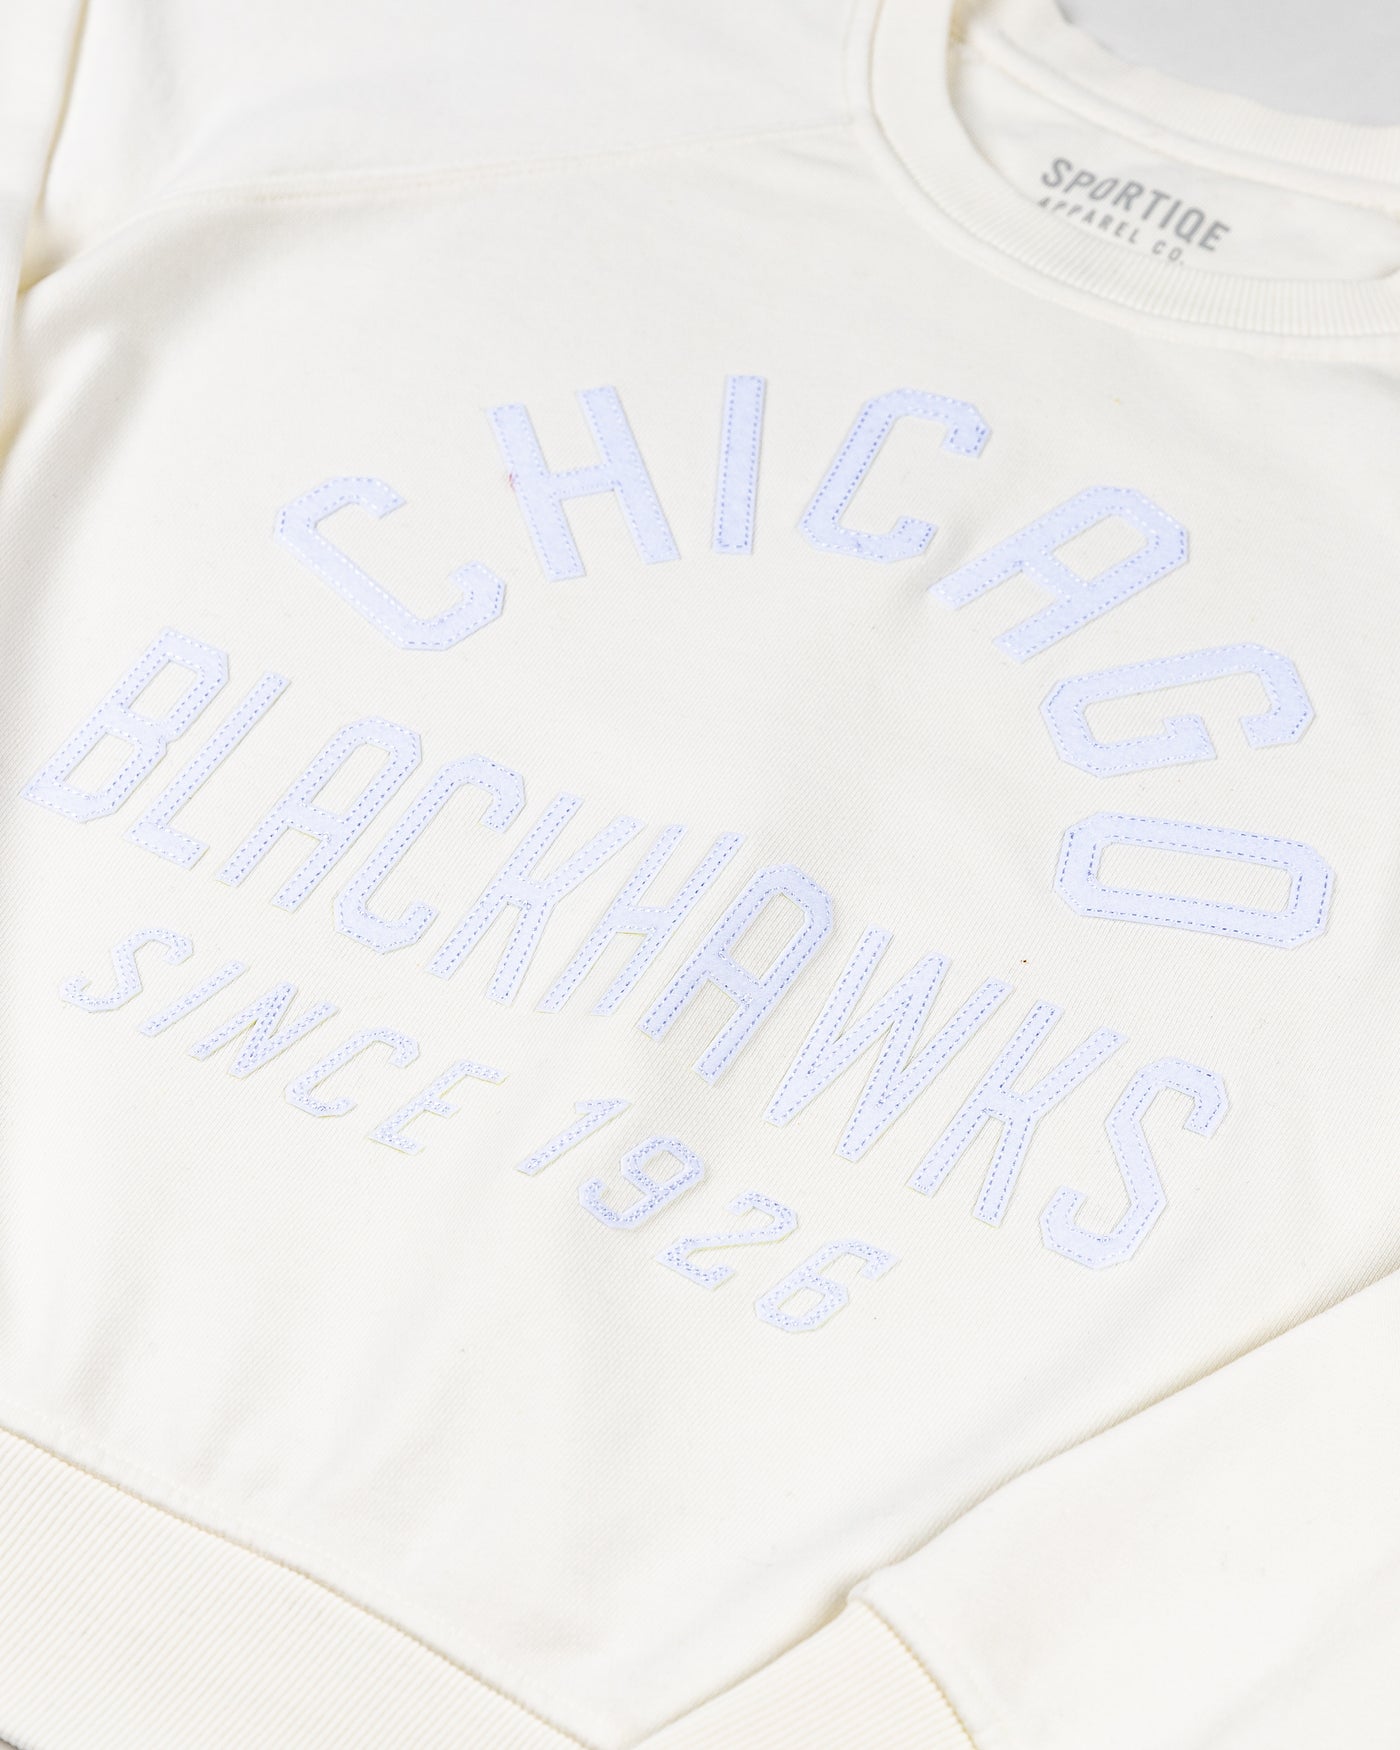 white Sportiqe ladies crewneck with tonal Chicago Blackhawks wordmark graphic embroidered across front - detail lay flat